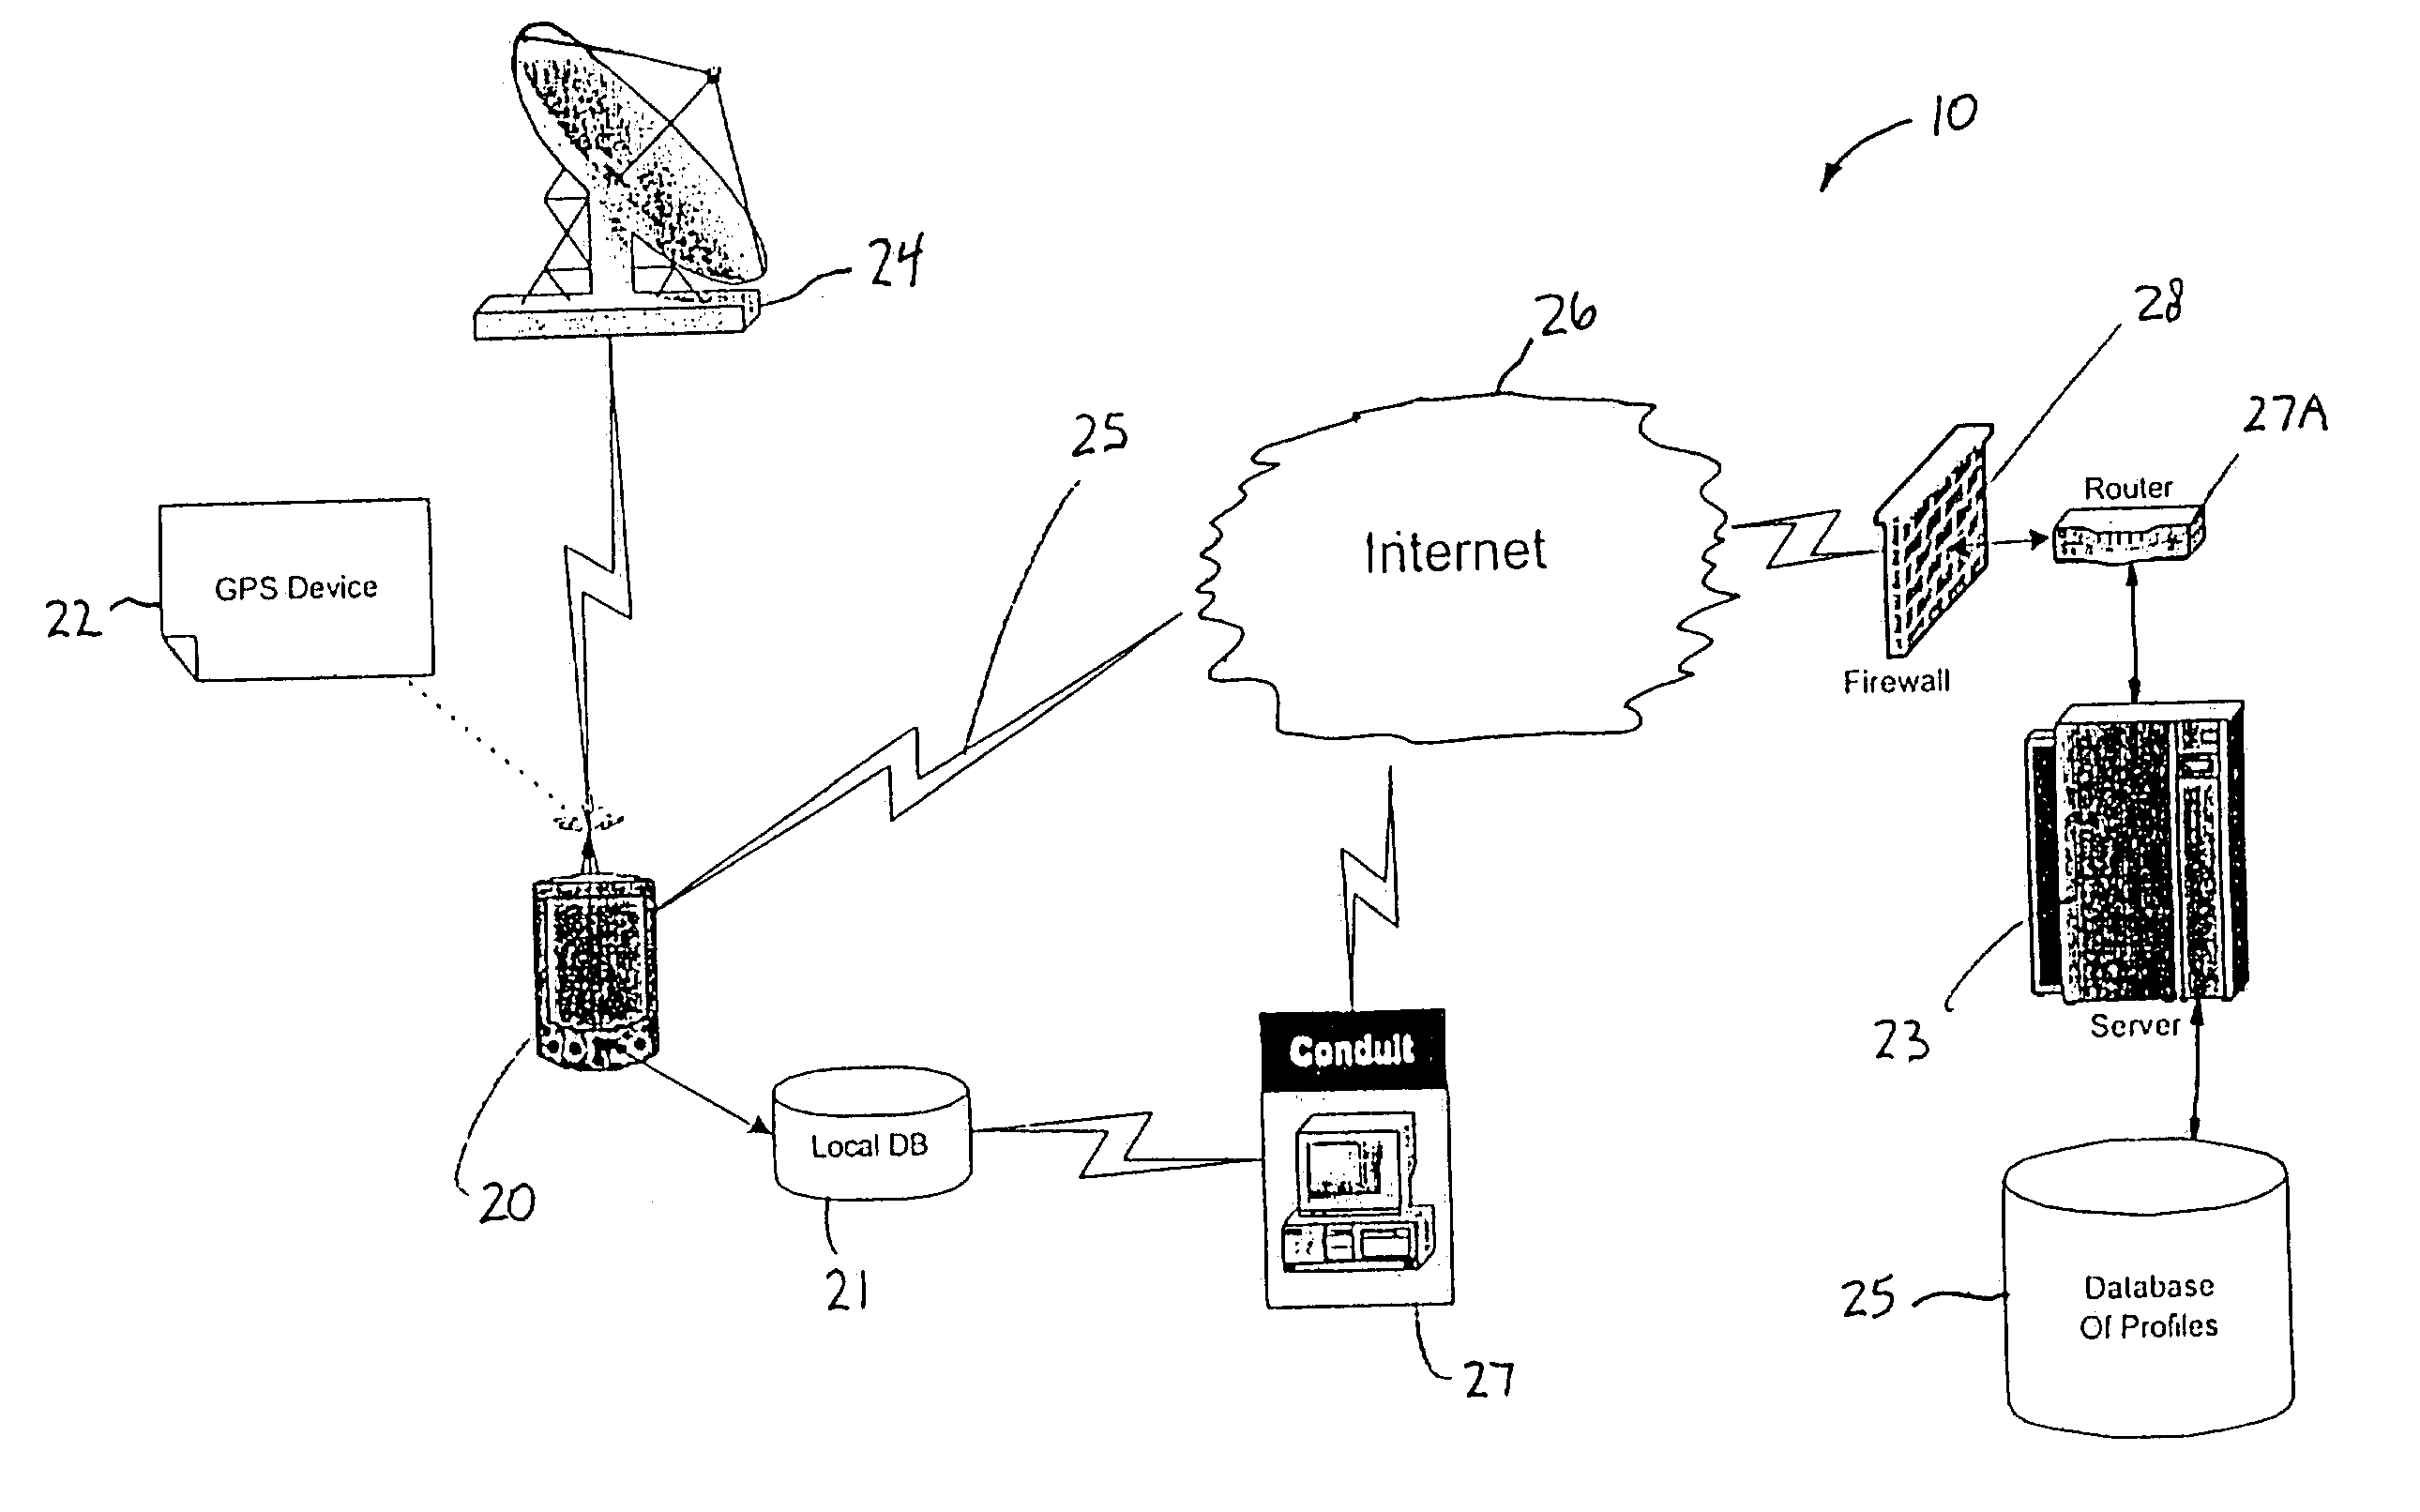 System and method for locating and notifying a user of a person, place or thing having attributes matching the user's stated preferences